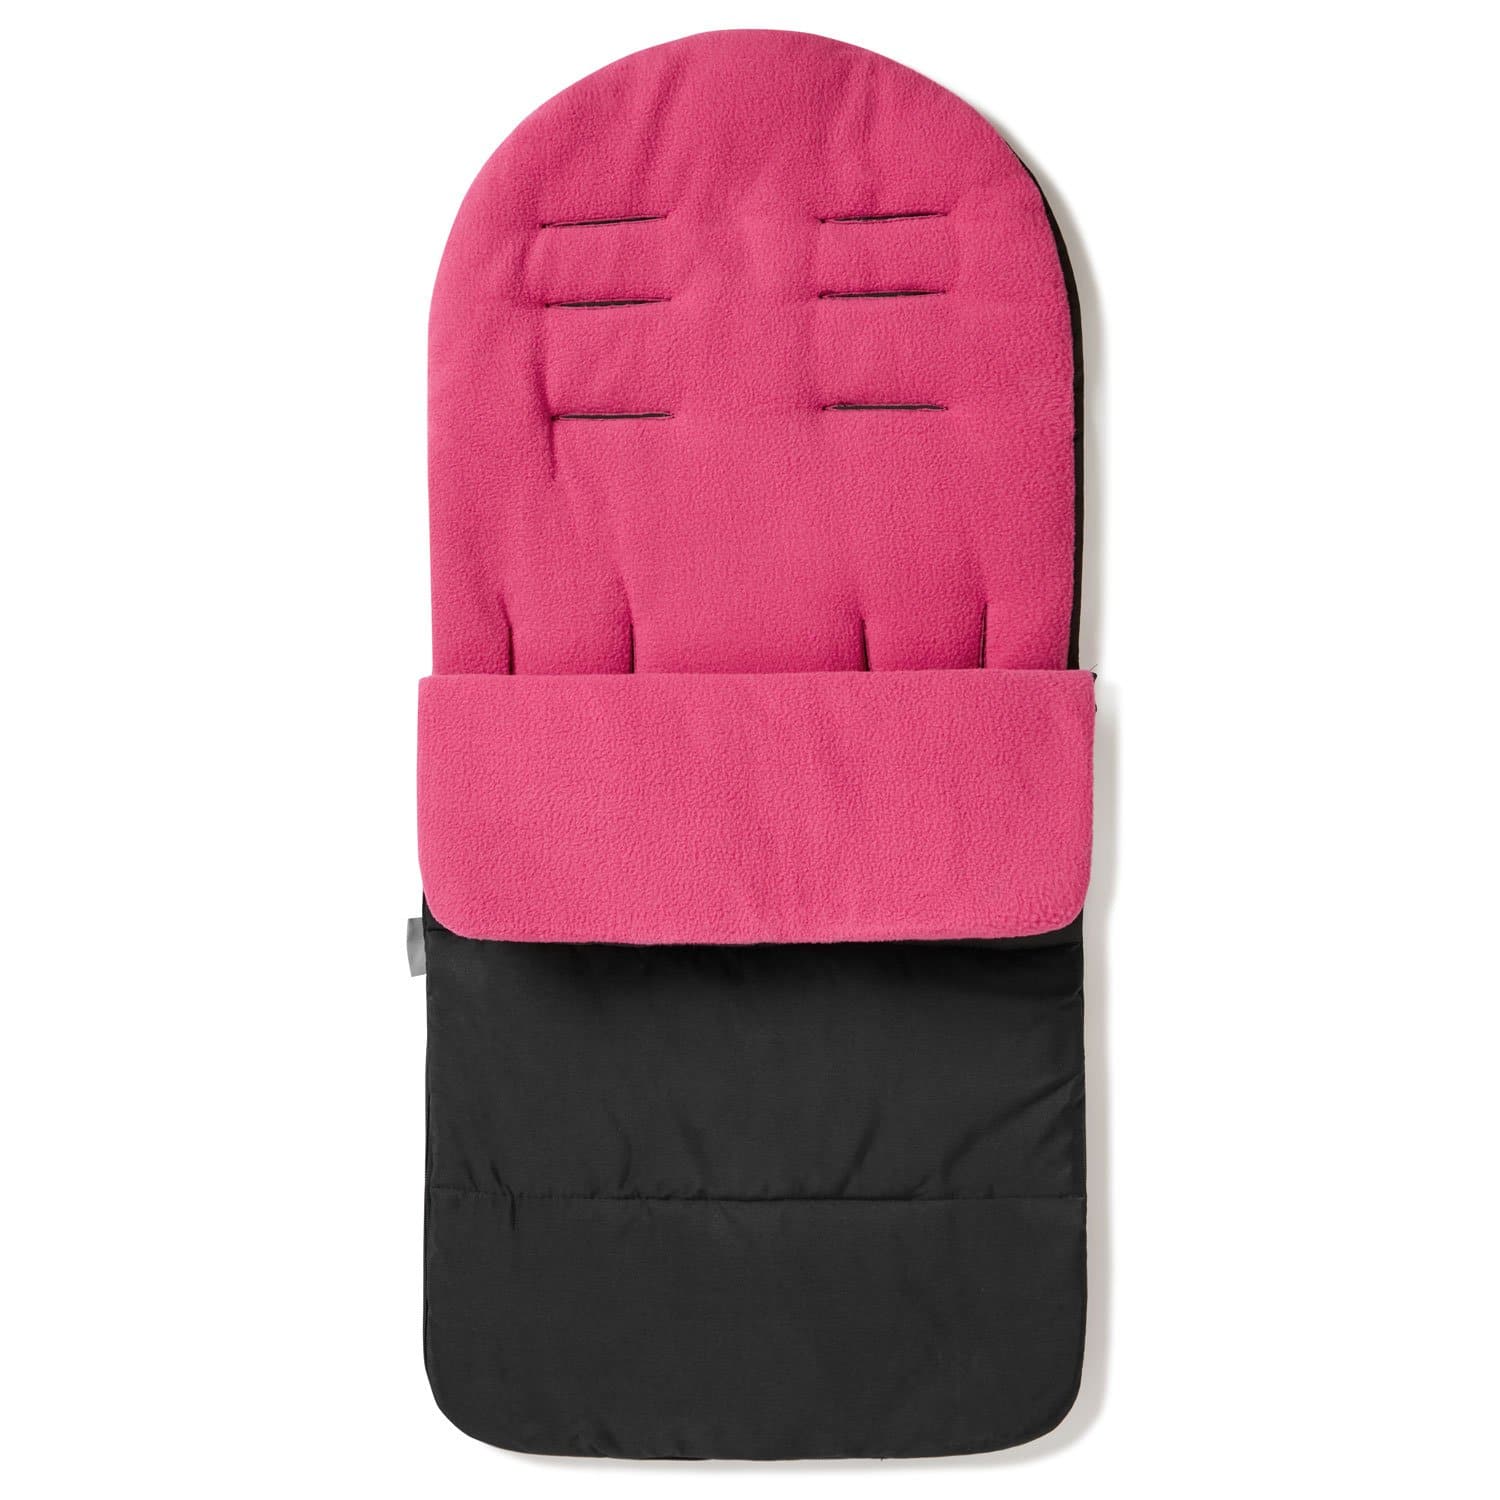 Premium Footmuff / Cosy Toes Compatible with Hauck - Pink Rose / Fits All Models | For Your Little One